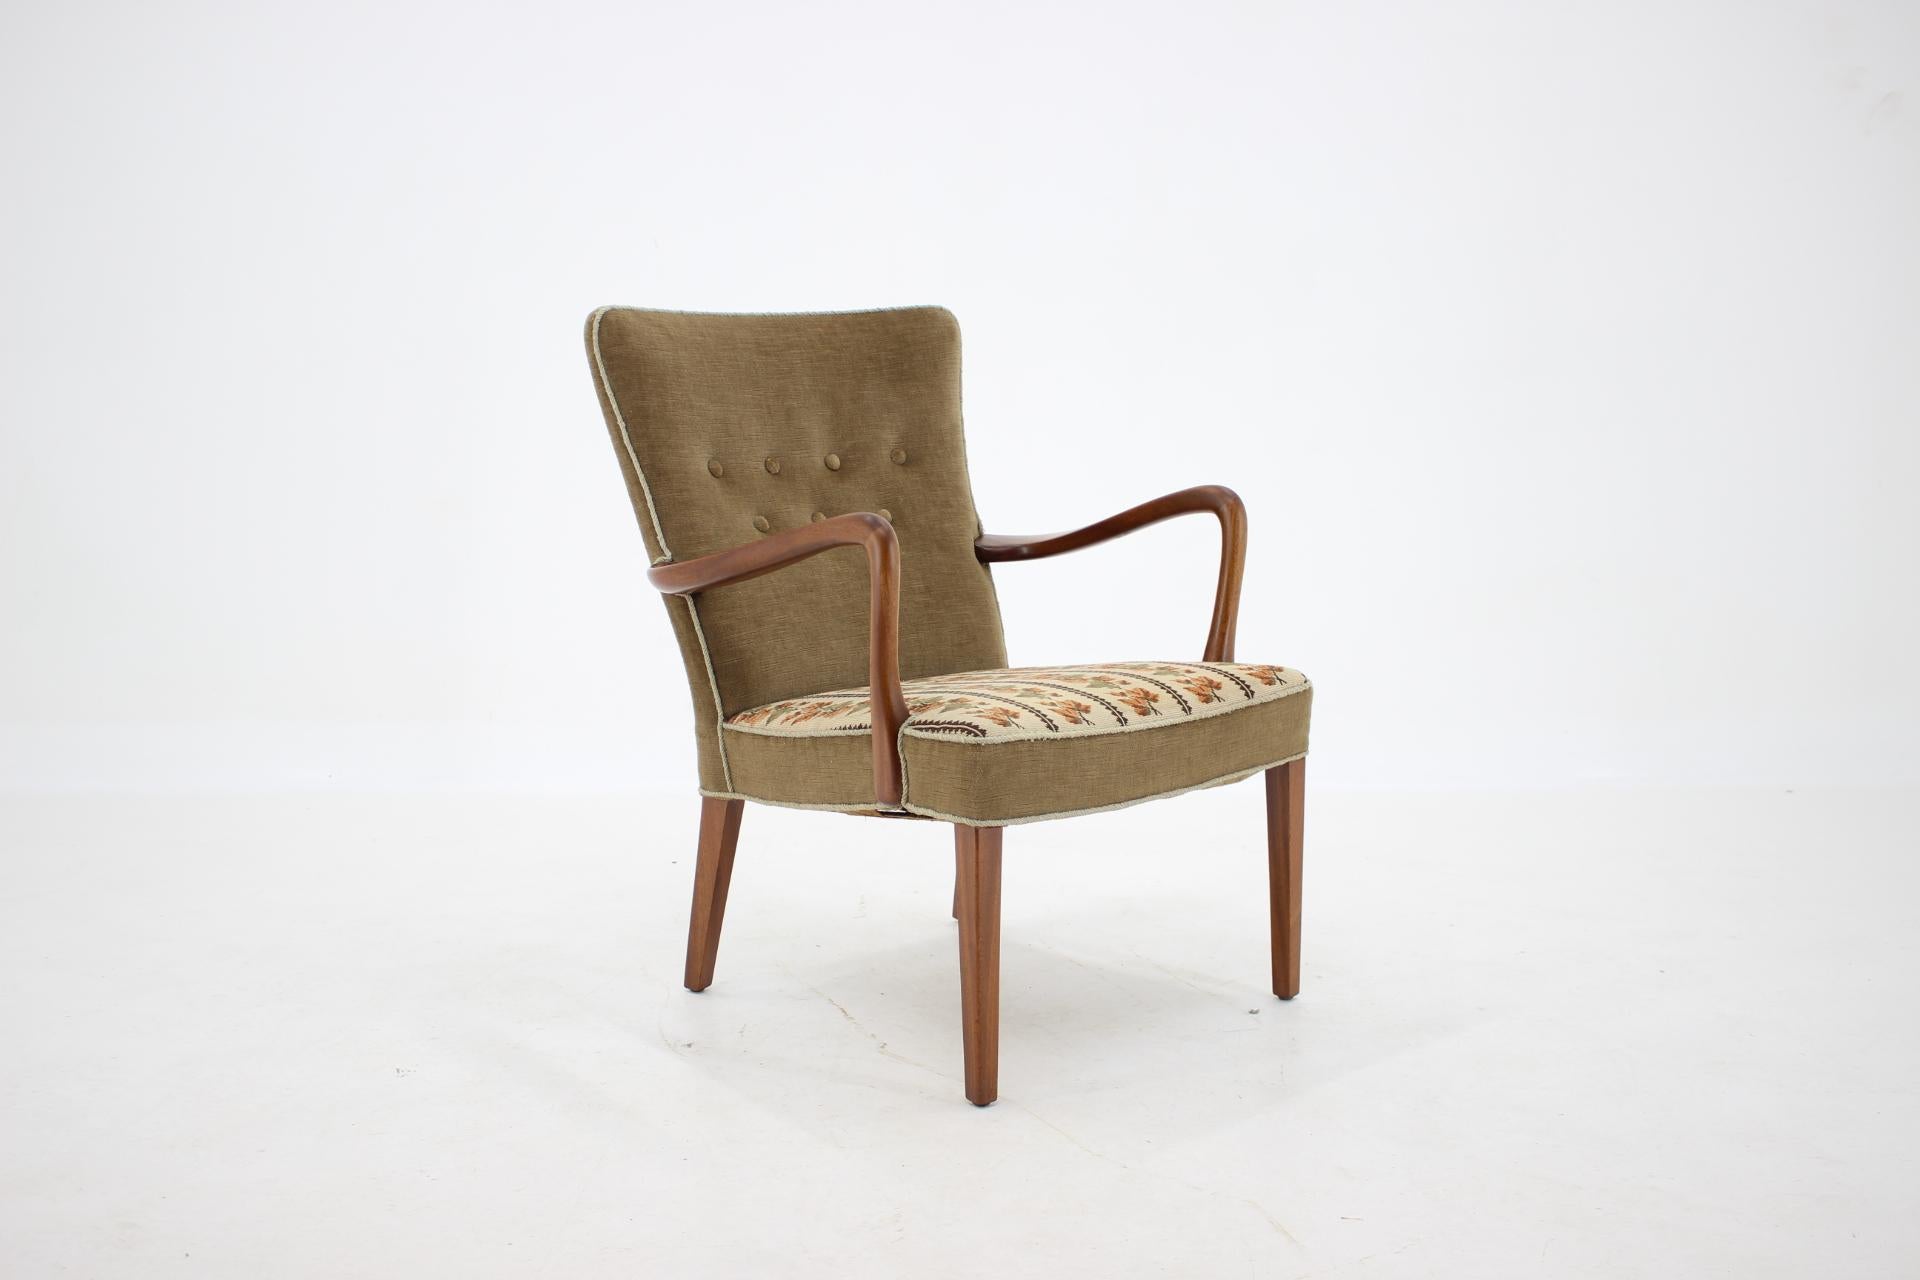 - Good original condition with minor signs of use 
- The fabric upholstery in good original condition with some signs of use 
- The wooden parts have been re-polished.